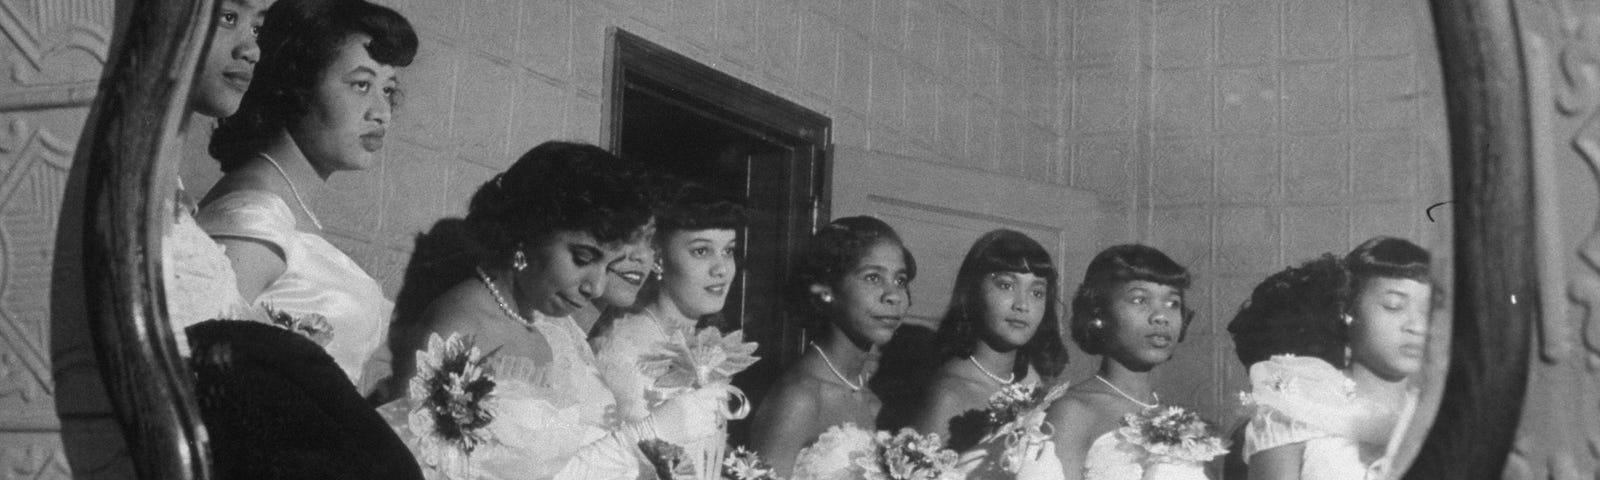 An archival photo of young African American women waiting to go downstairs for their debutante cotillion.